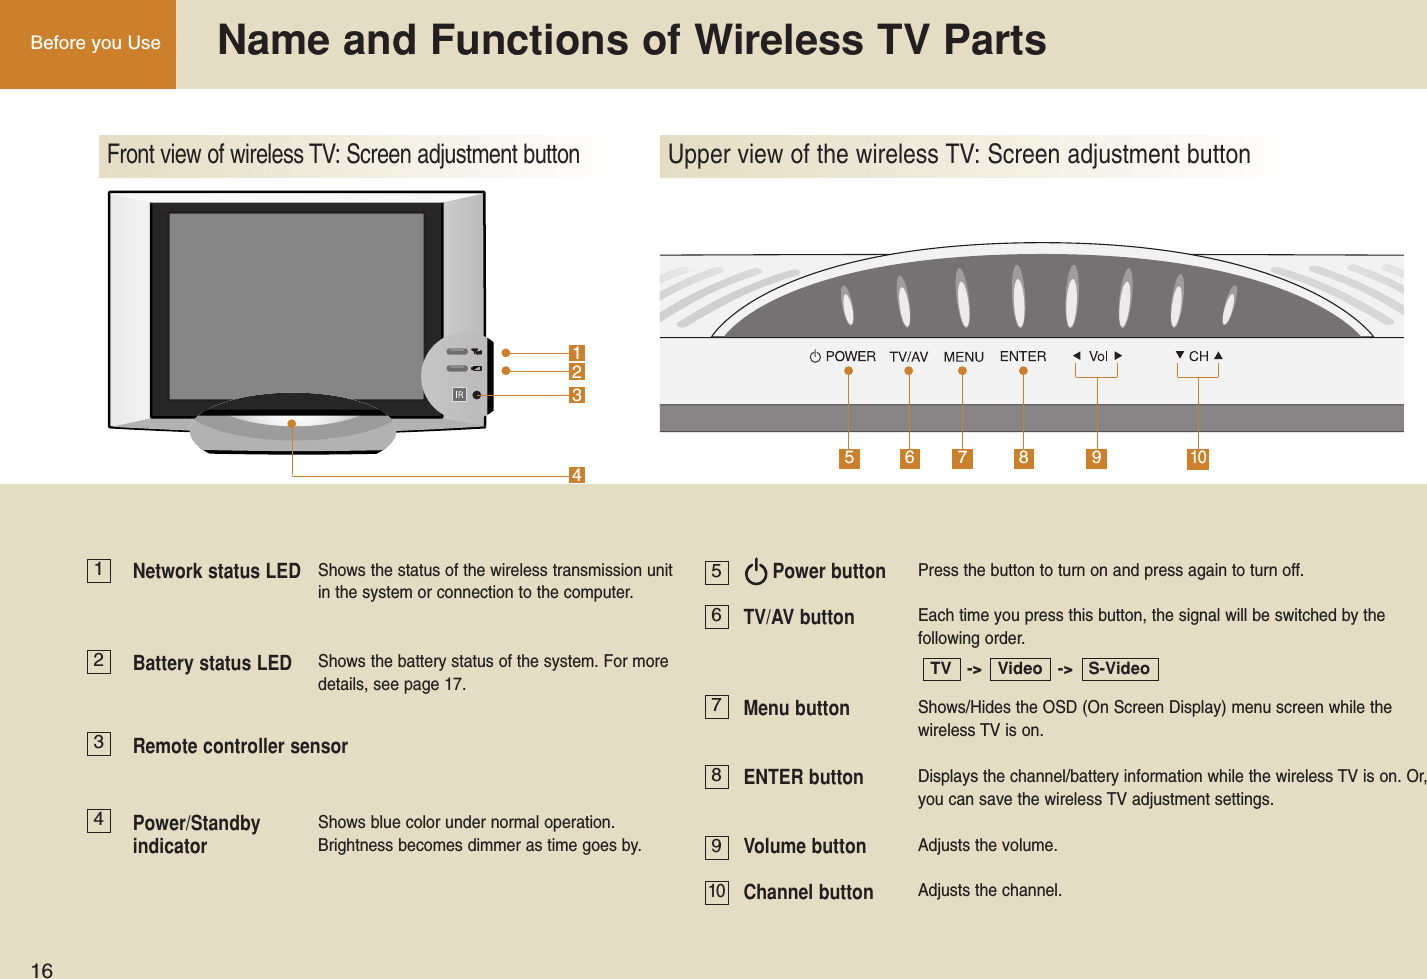 16Before you Use  Name and Functions of Wireless TV PartsFront view of wireless TV: Screen adjustment buttonUpper view of the wireless TV: Screen adjustment button4987653211015678910234Network status LED Battery status LEDPower/Standby indicatorRemote controller sensorPower buttonTV/AV buttonMenu buttonENTER buttonVolume buttonChannel buttonShows the status of the wireless transmission unitin the system or connection to the computer.Shows the battery status of the system. For moredetails, see page 17.Shows blue color under normal operation.Brightness becomes dimmer as time goes by.Press the button to turn on and press again to turn off.Each time you press this button, the signal will be switched by the following order.Shows/Hides the OSD (On Screen Display) menu screen while the wireless TV is on.Displays the channel/battery information while the wireless TV is on. Or,you can save the wireless TV adjustment settings.Adjusts the volume.Adjusts the channel.TV   -&gt;   Video   -&gt;   S-Video